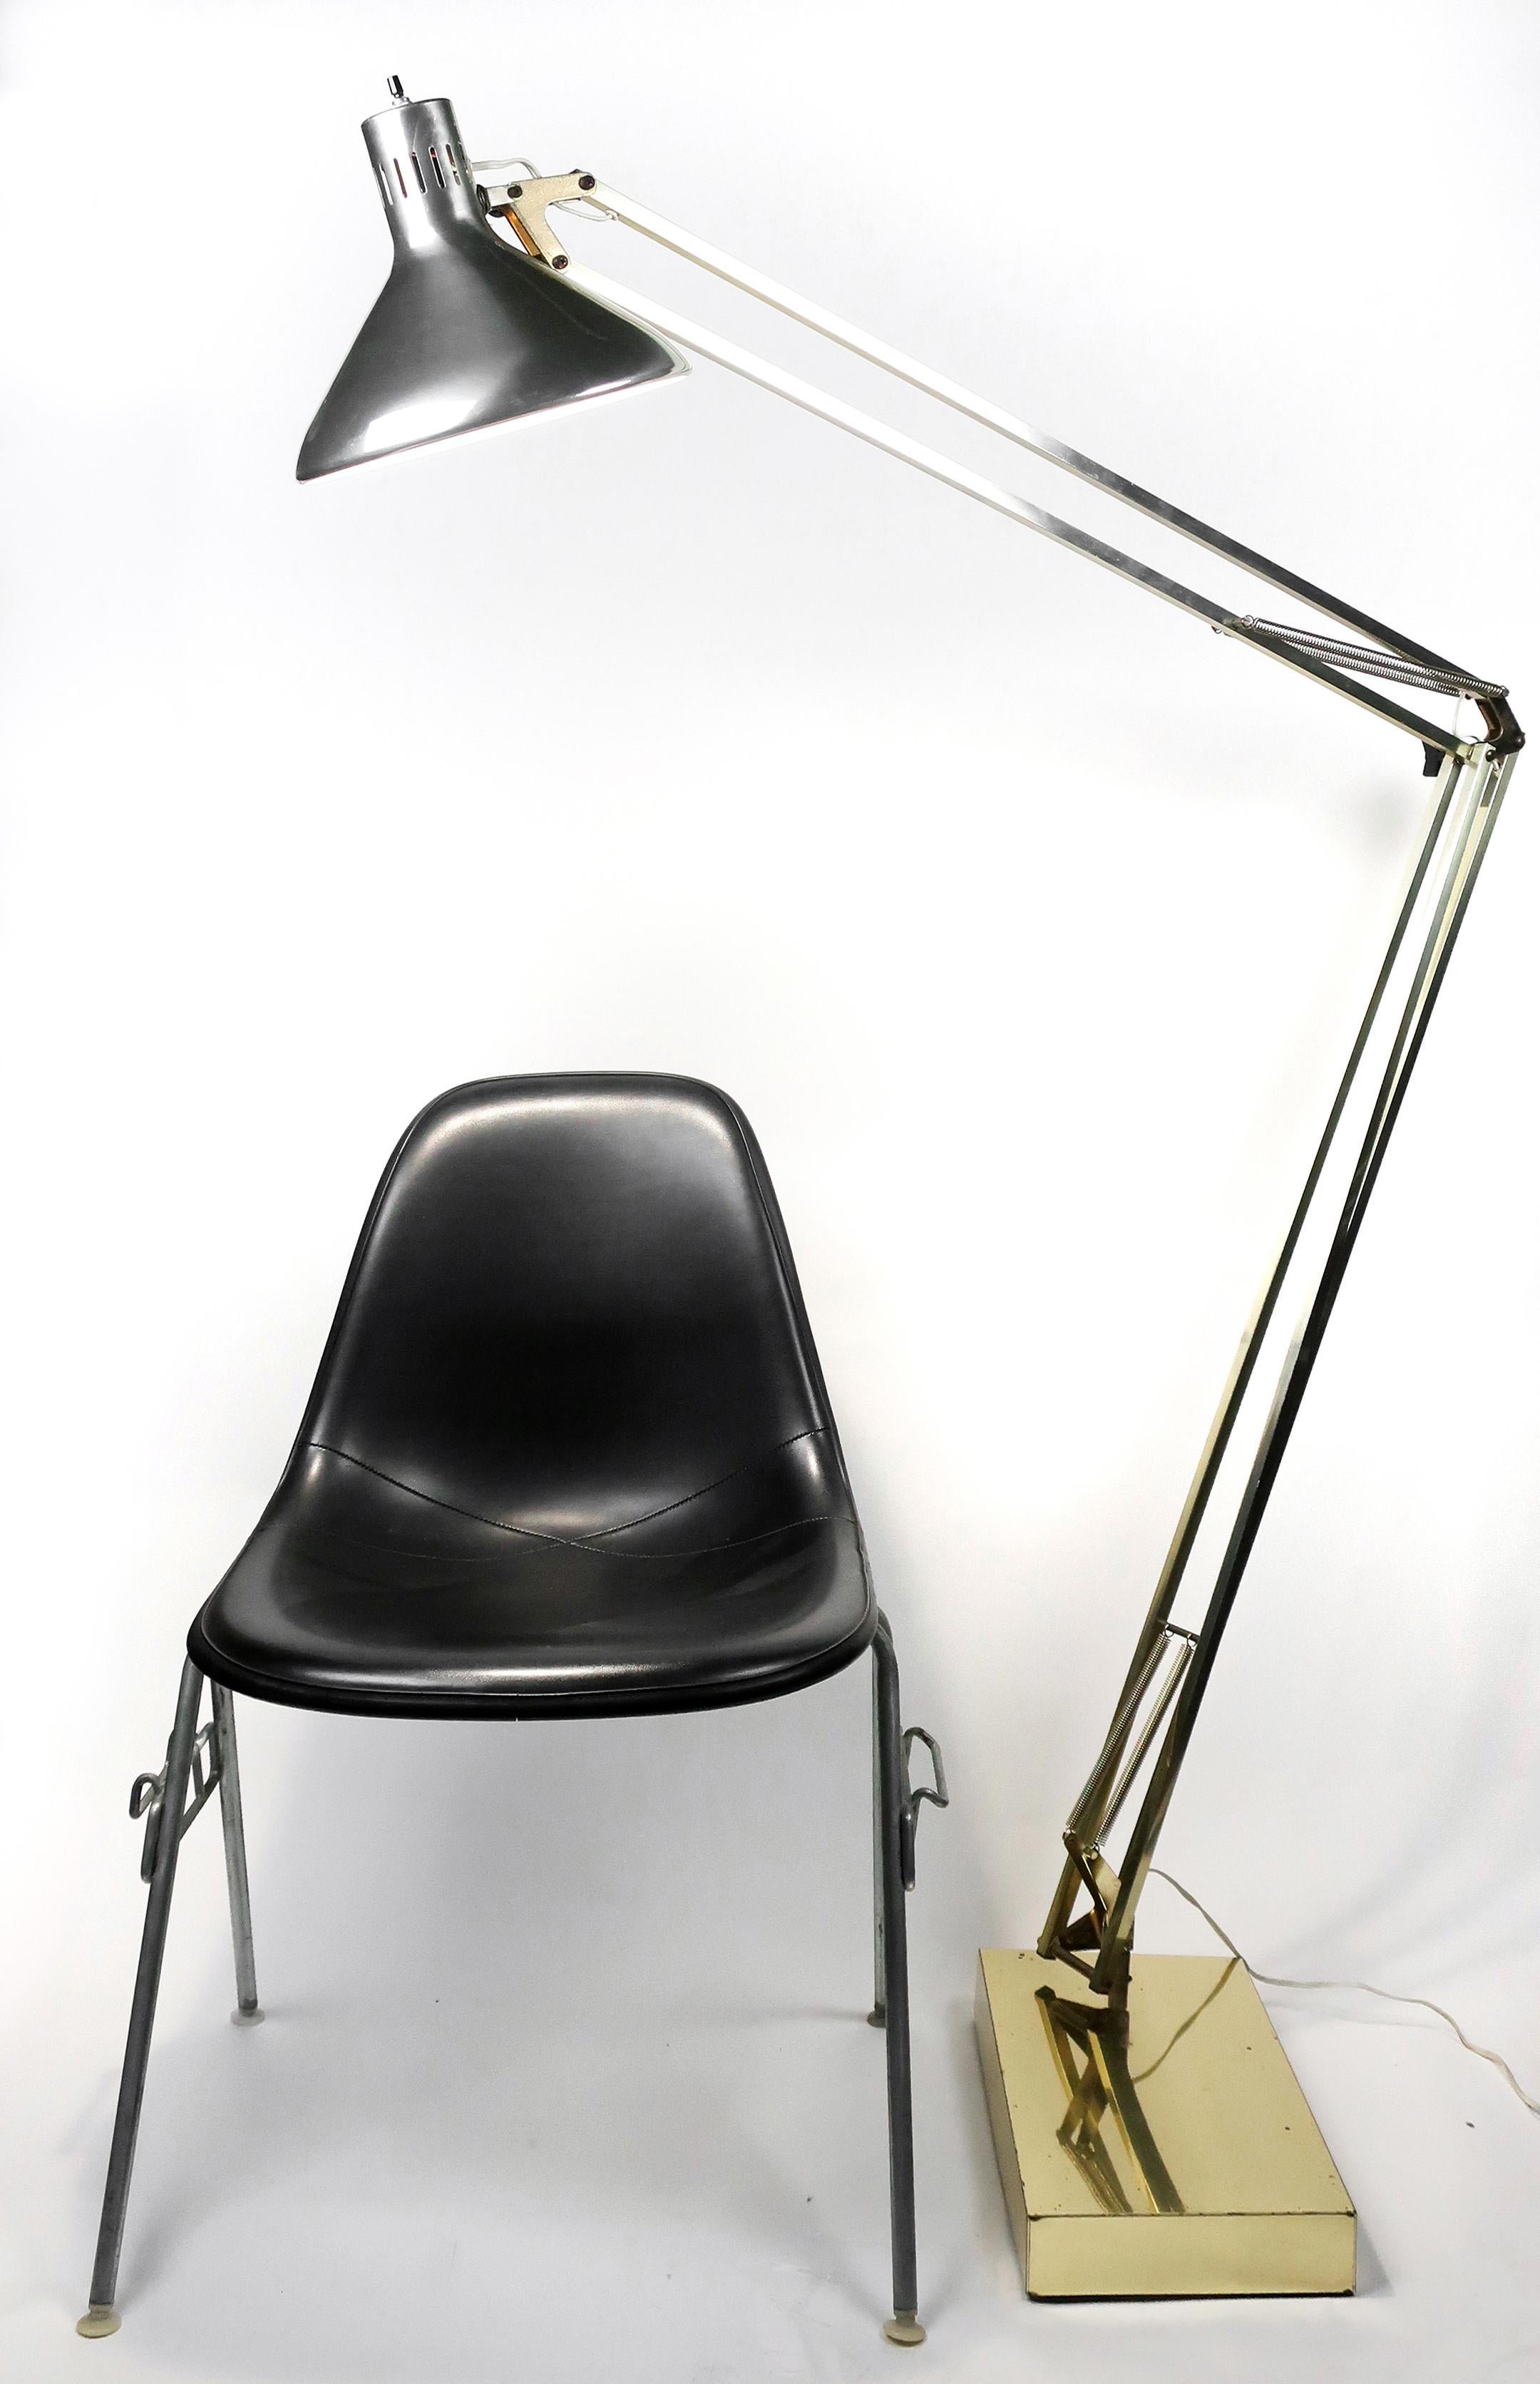 A Mid-Century Modern vintage brass floor drafting/architect's lamp in the style of Luxo. Brass-plated articulating arm with heavy base. So large that it works over a couch, a dining room table, or as a giant bedside lamp.

Works great and is in